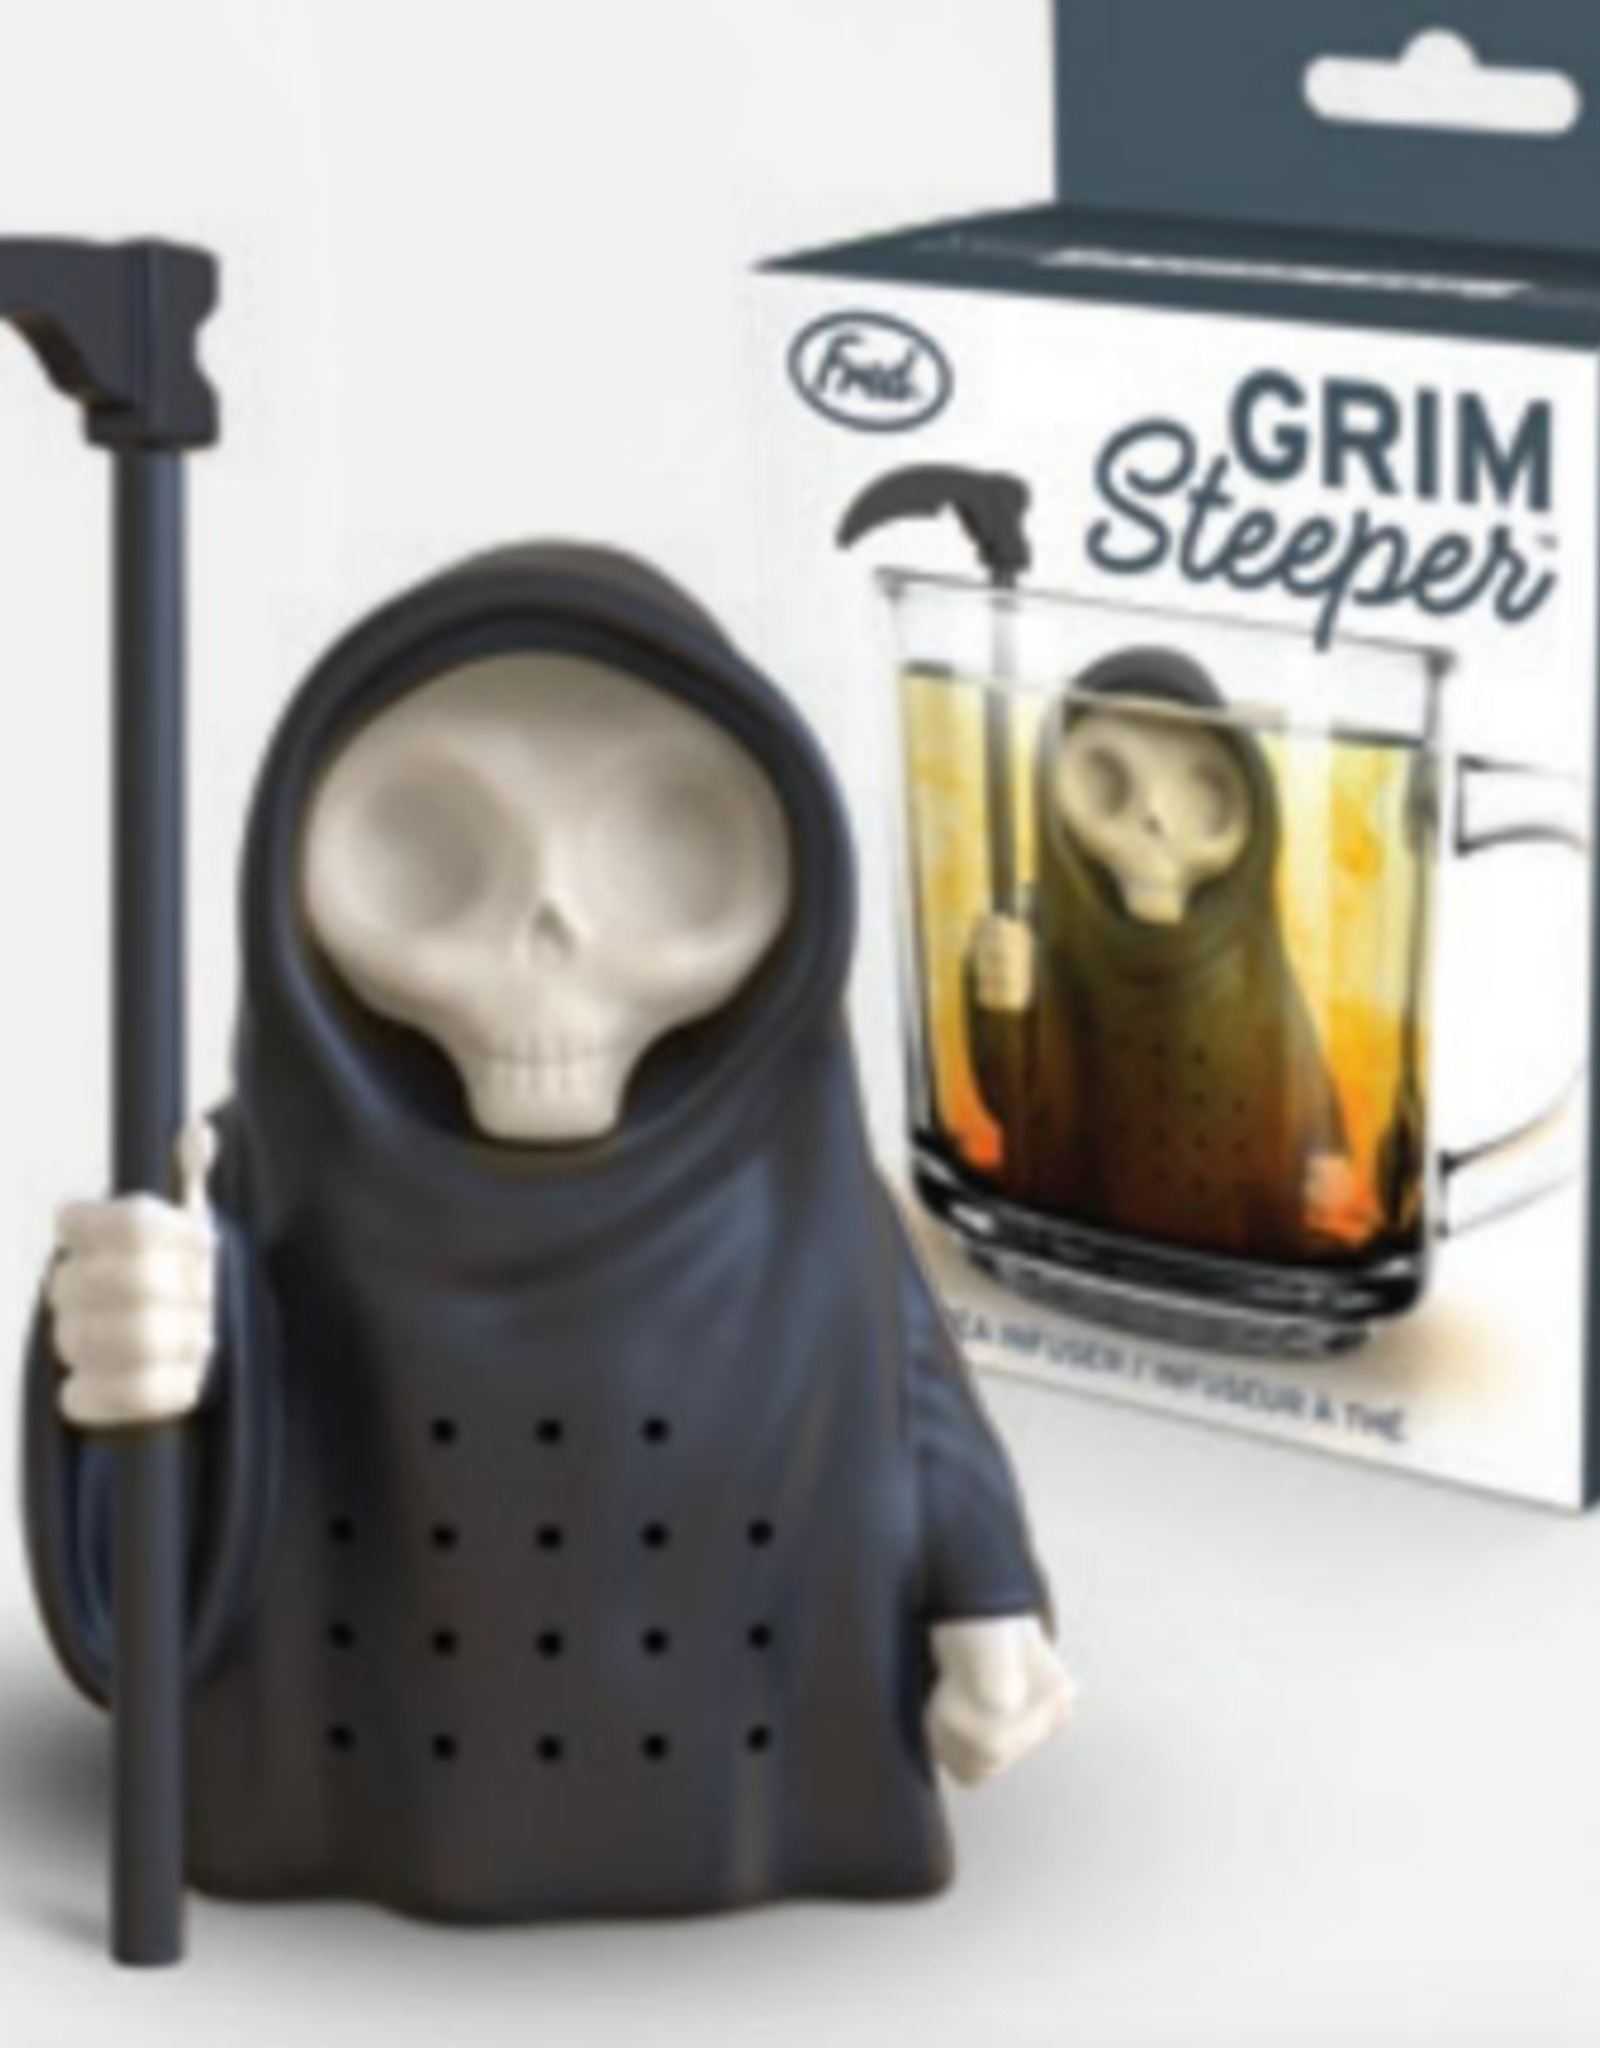 Grim Steeper Tea Infuser set in front of its box packaging.